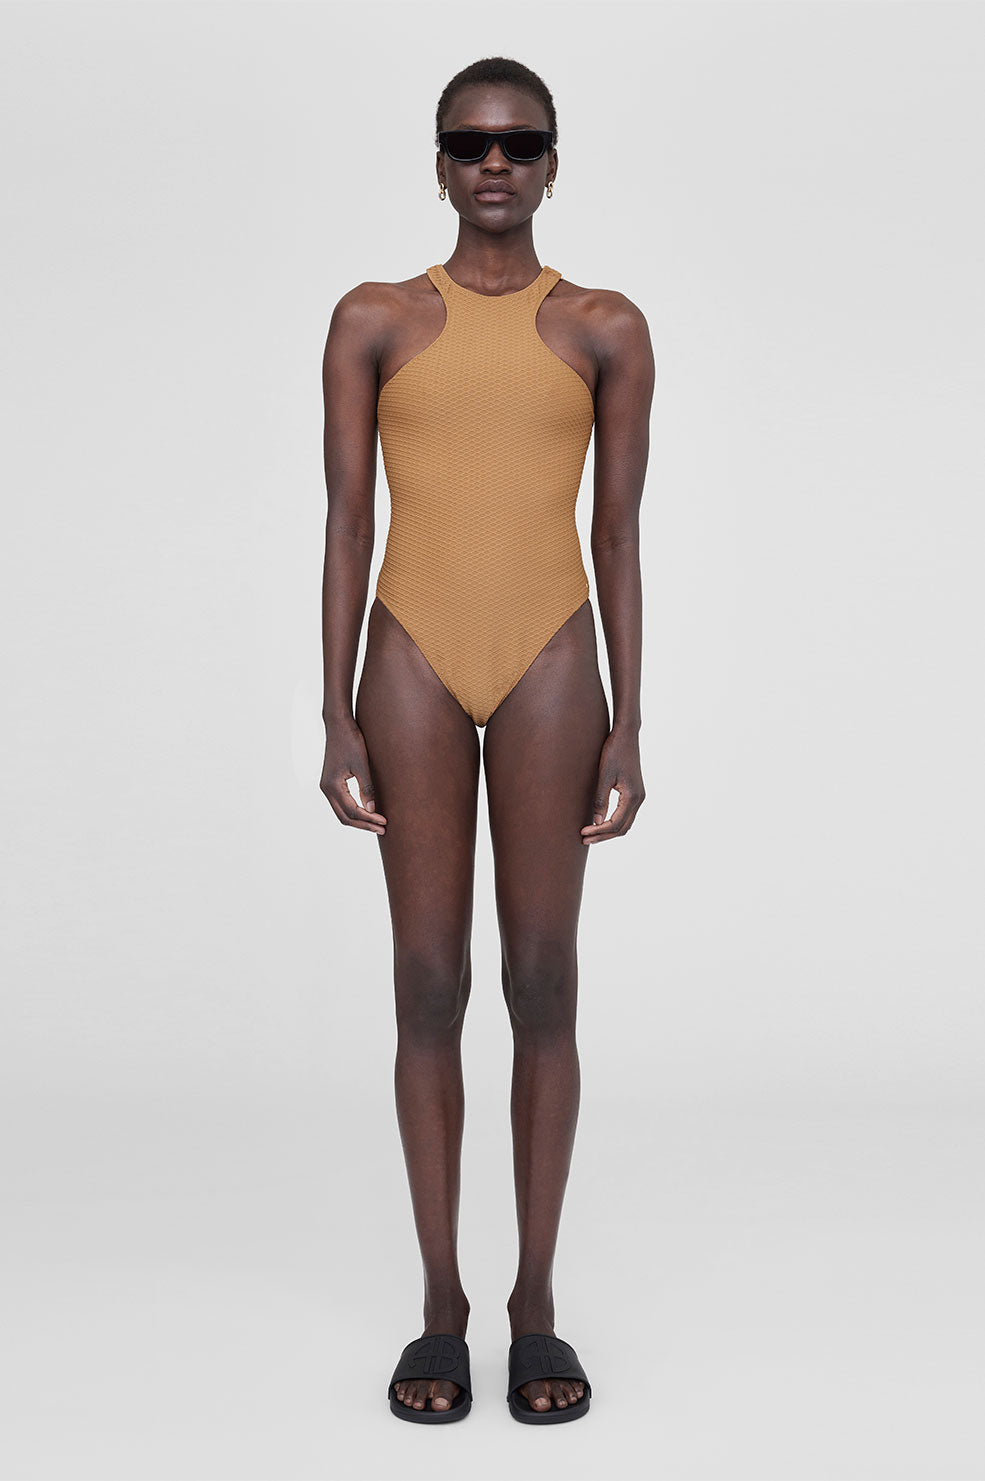 ANINE BING Morgan One Piece - Camel - On Model Front